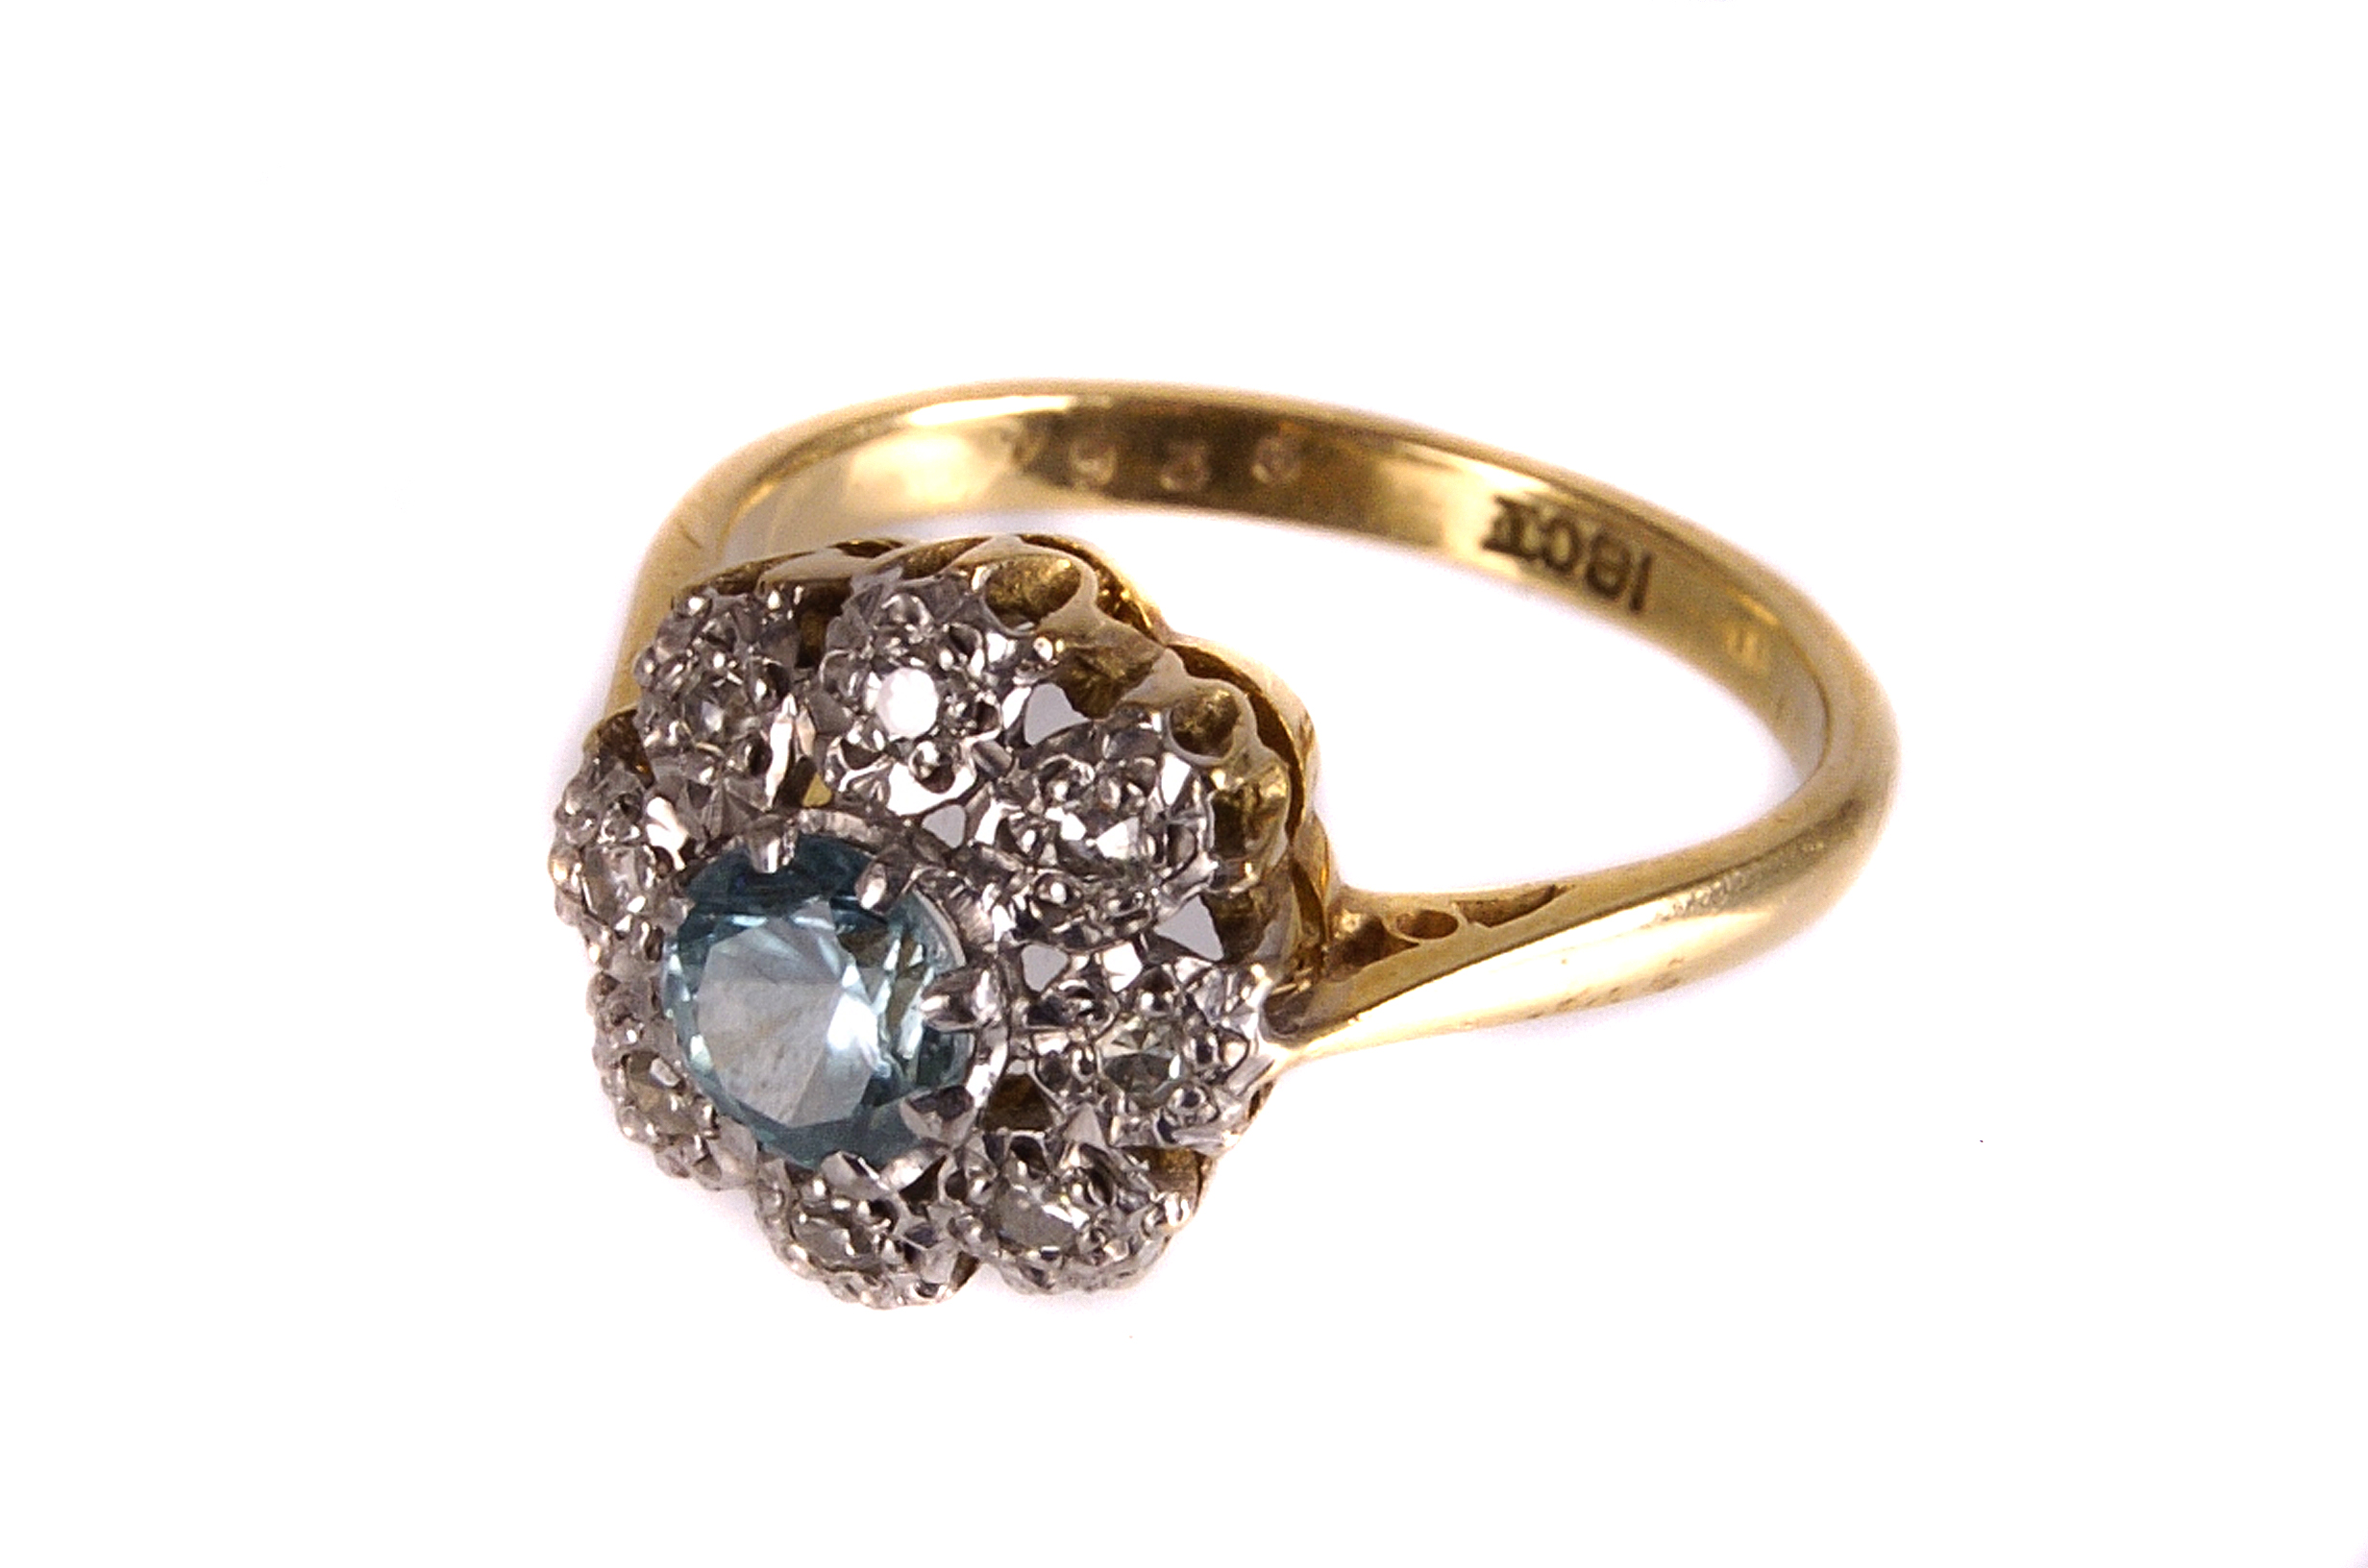 A modern 18ct gold and gem set cluster dress ring, with a central light blue stone, probably a